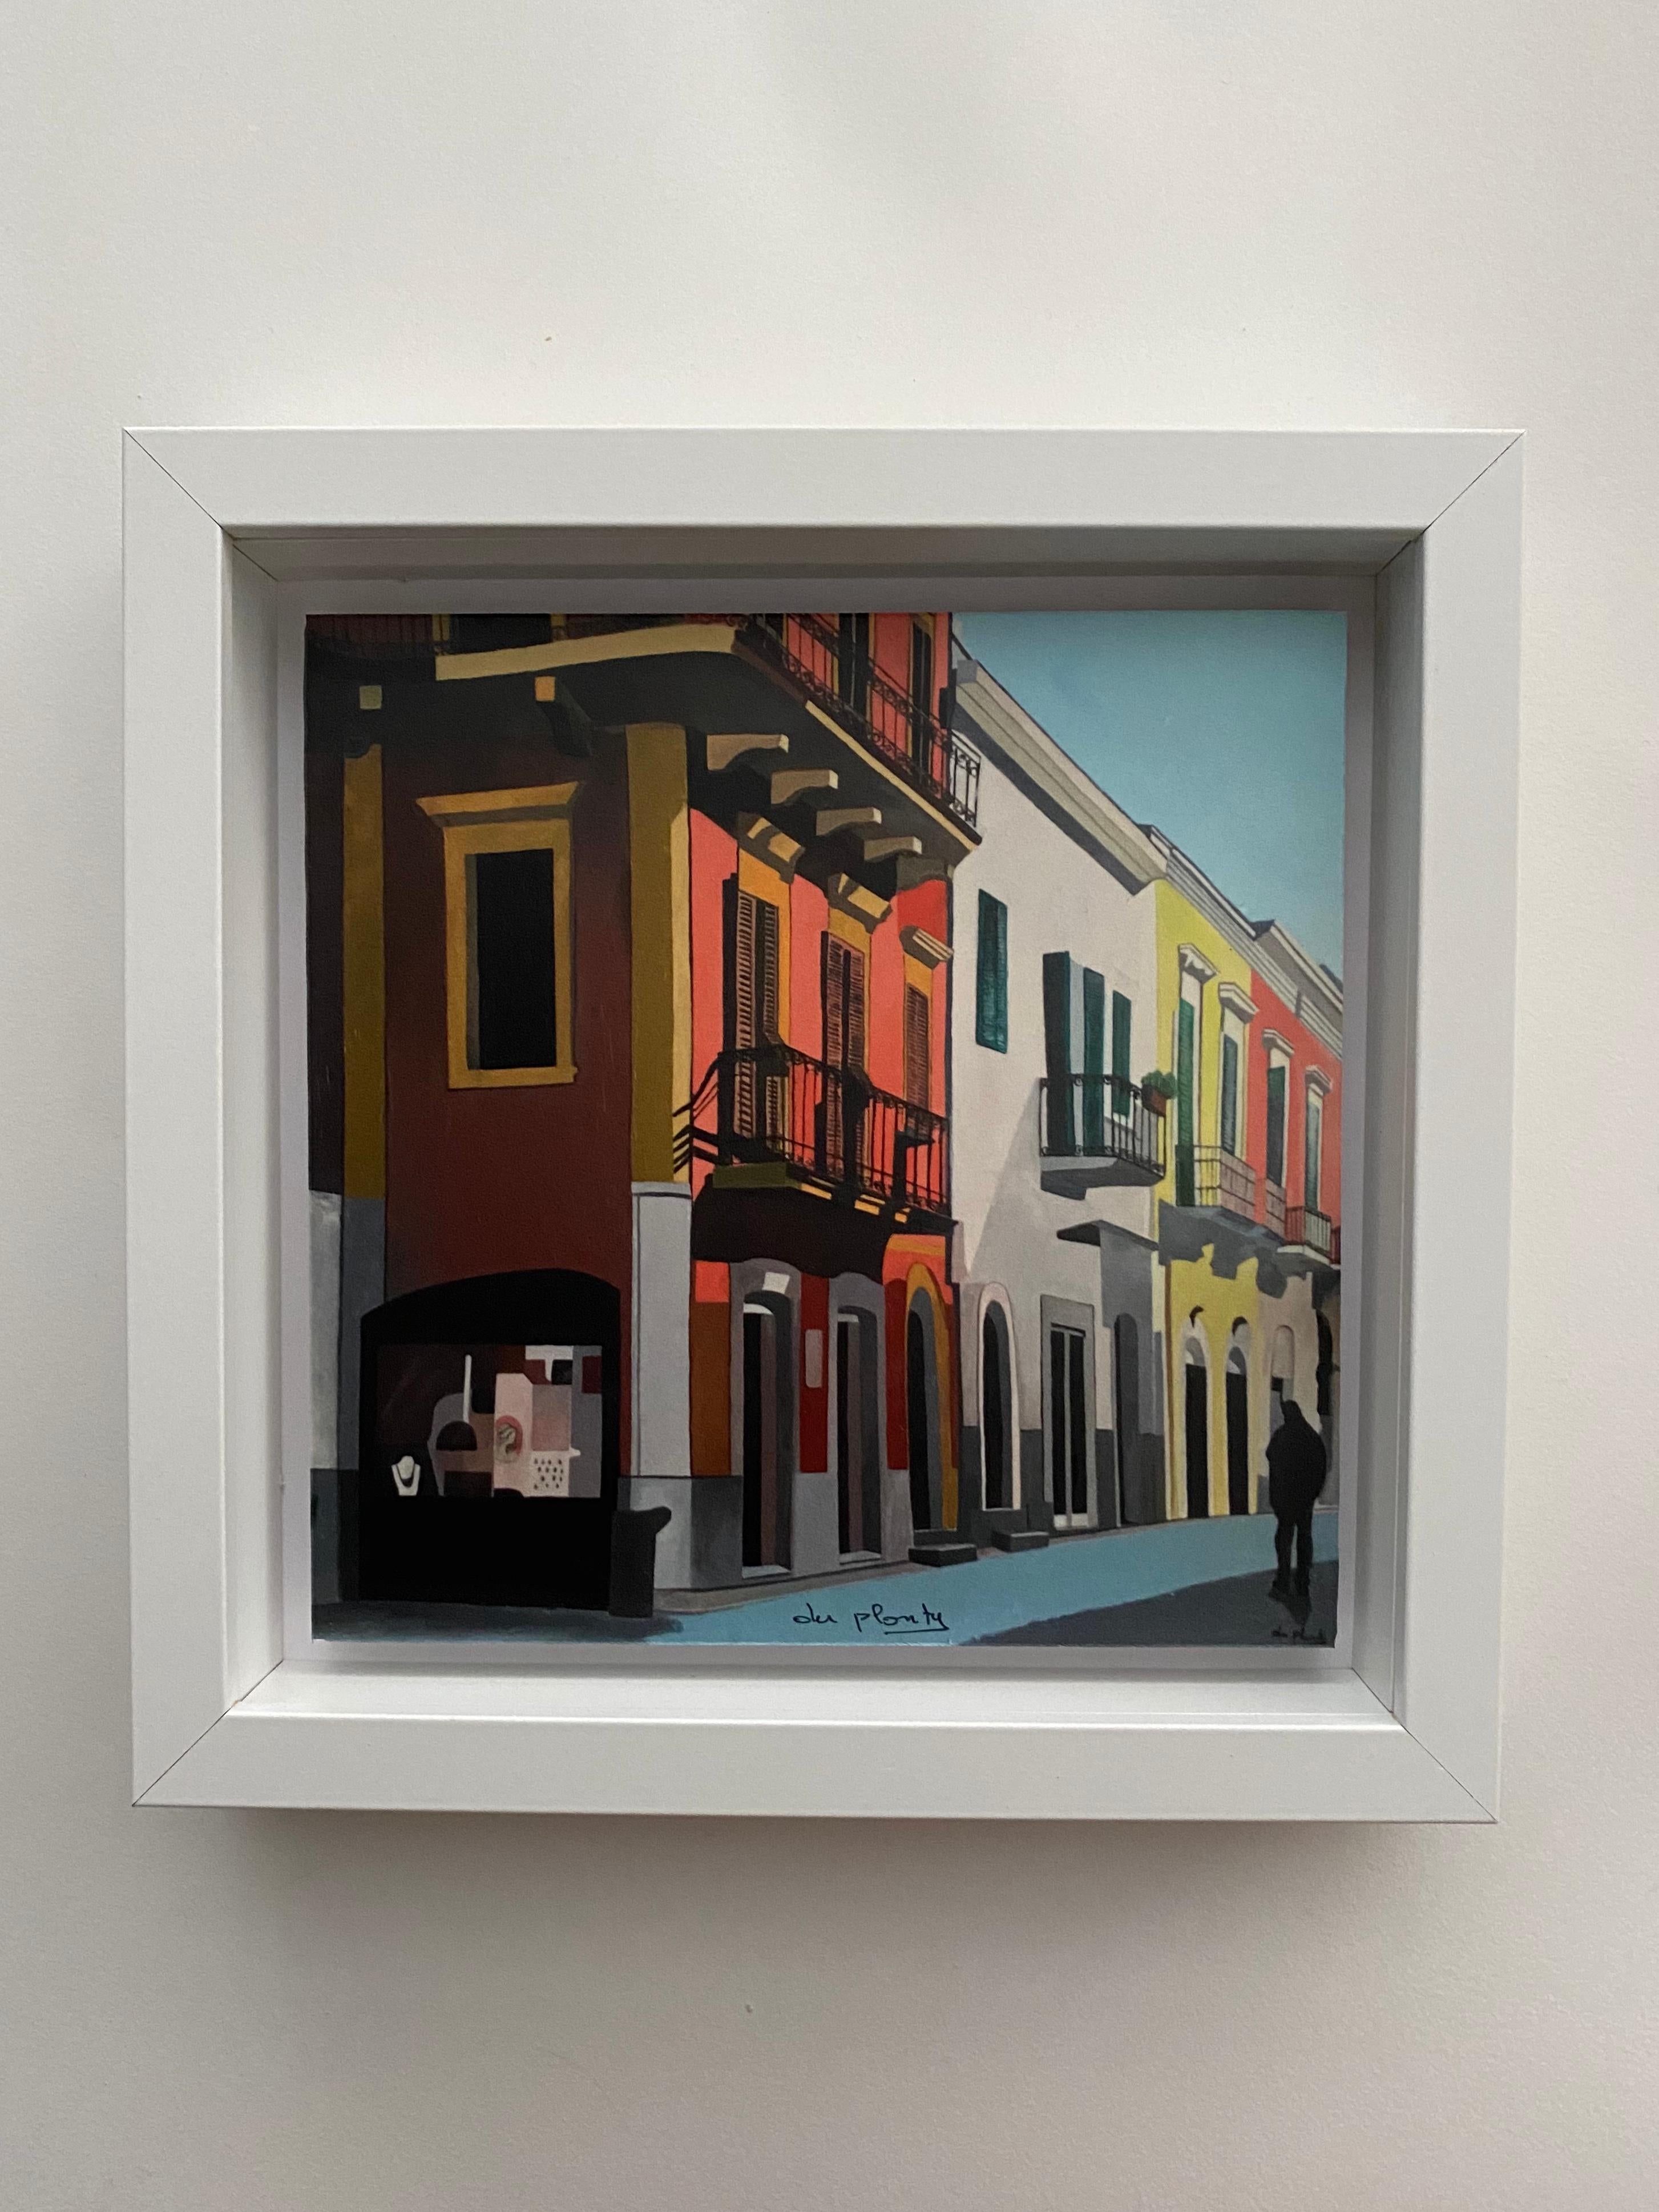 Chromogenic print + white frame

Anne du Planty is a French artist born in 1953 who lives & works in Paris, France.

Originally from North of France, she discovered lights of the South, the brightness of the sun, the shade of the alleyways while